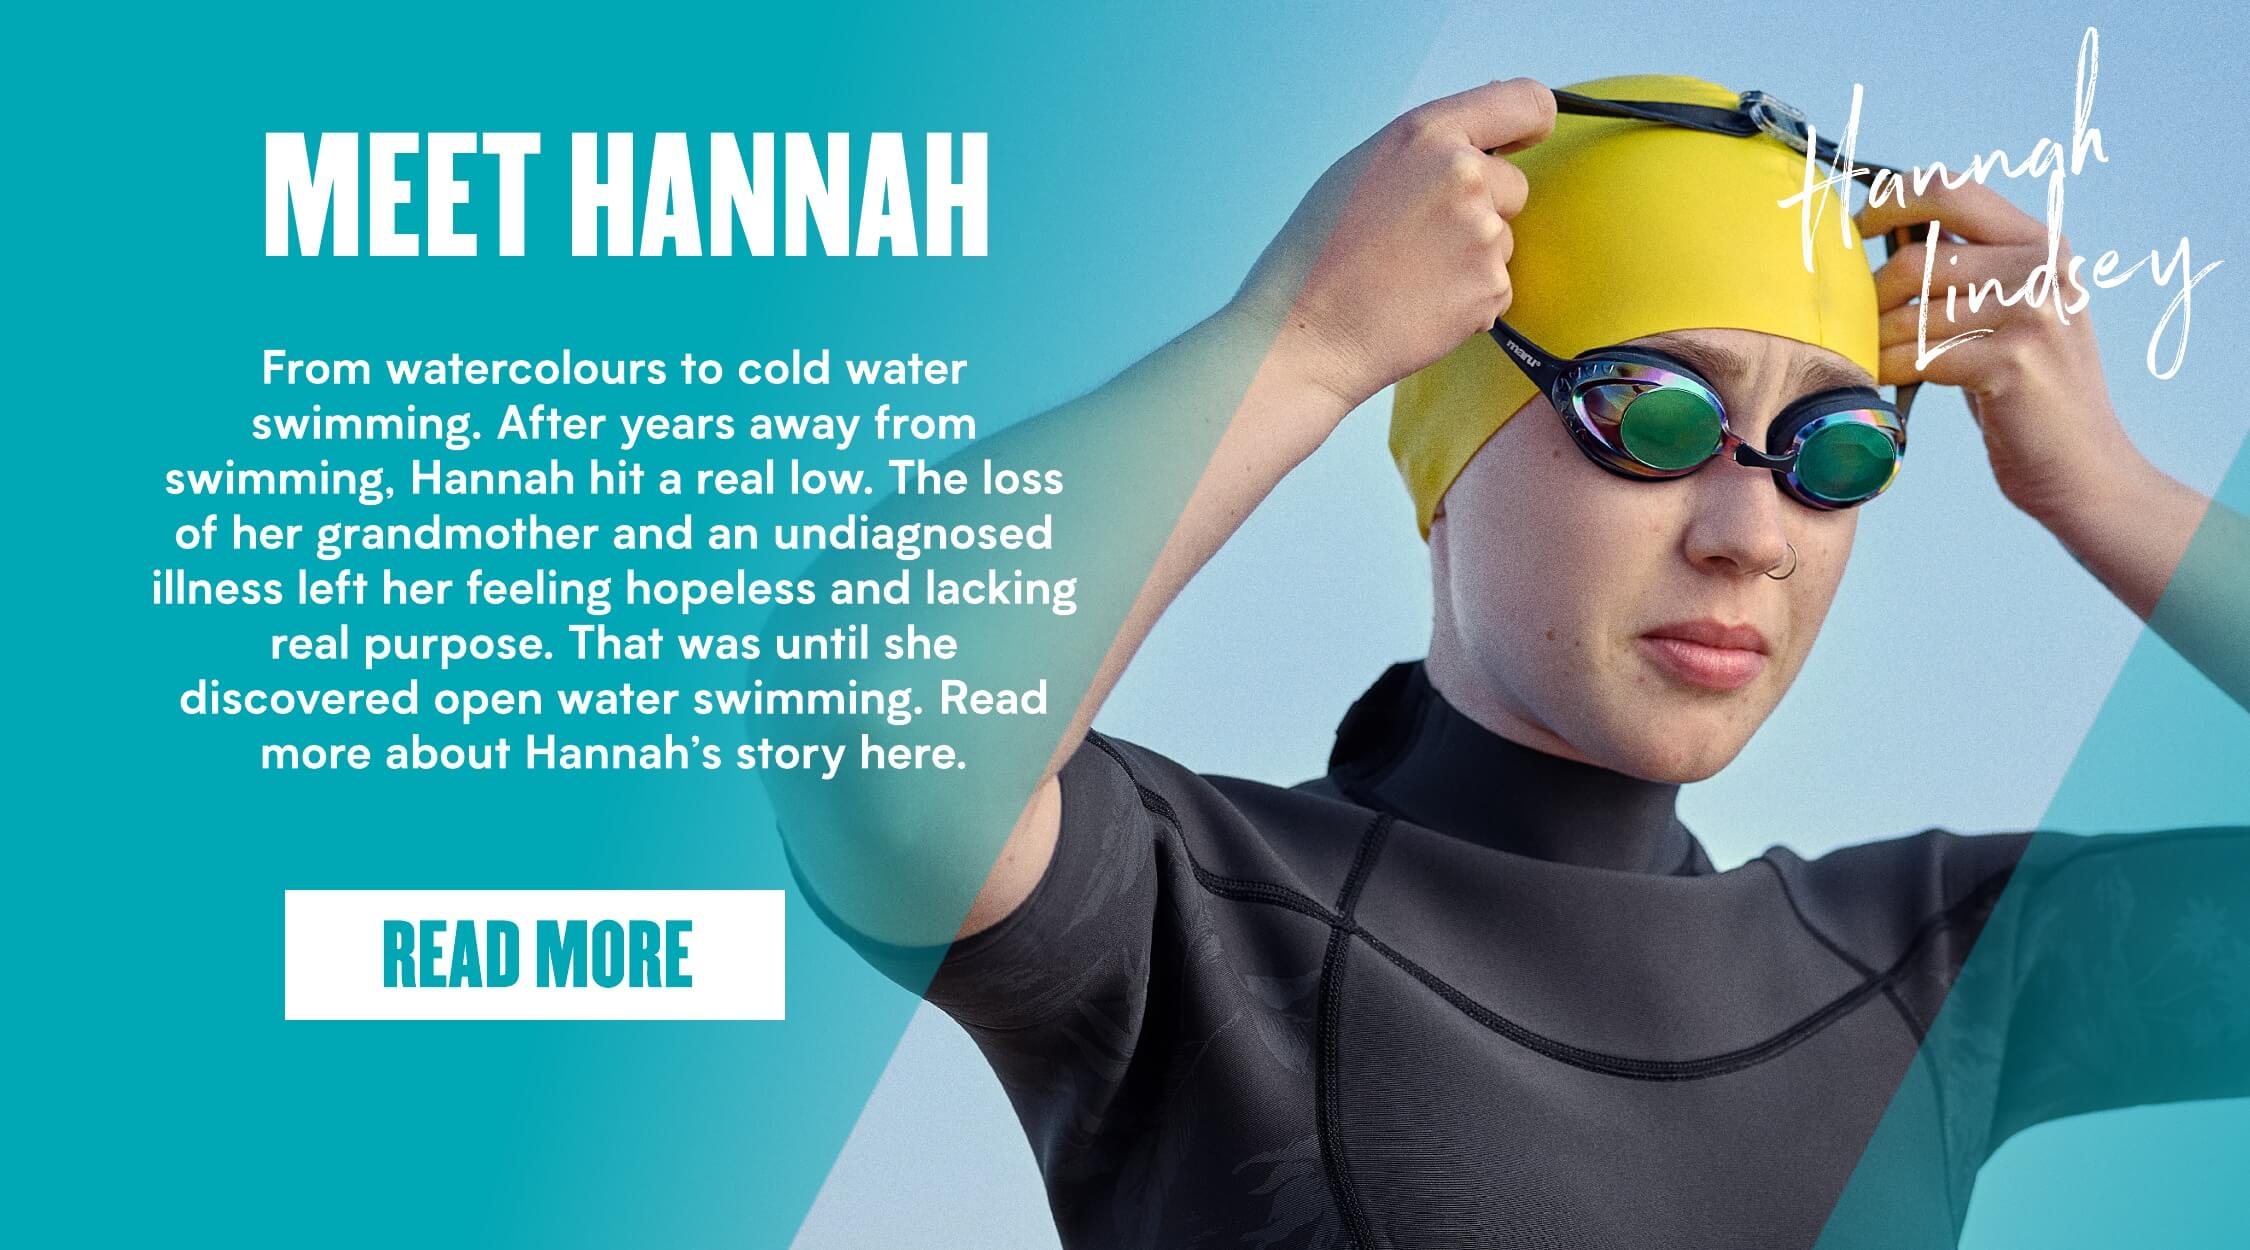 https://www.myprotein.com.my/blog/our-ambassadors/hannah-open-water-swimming-050721/